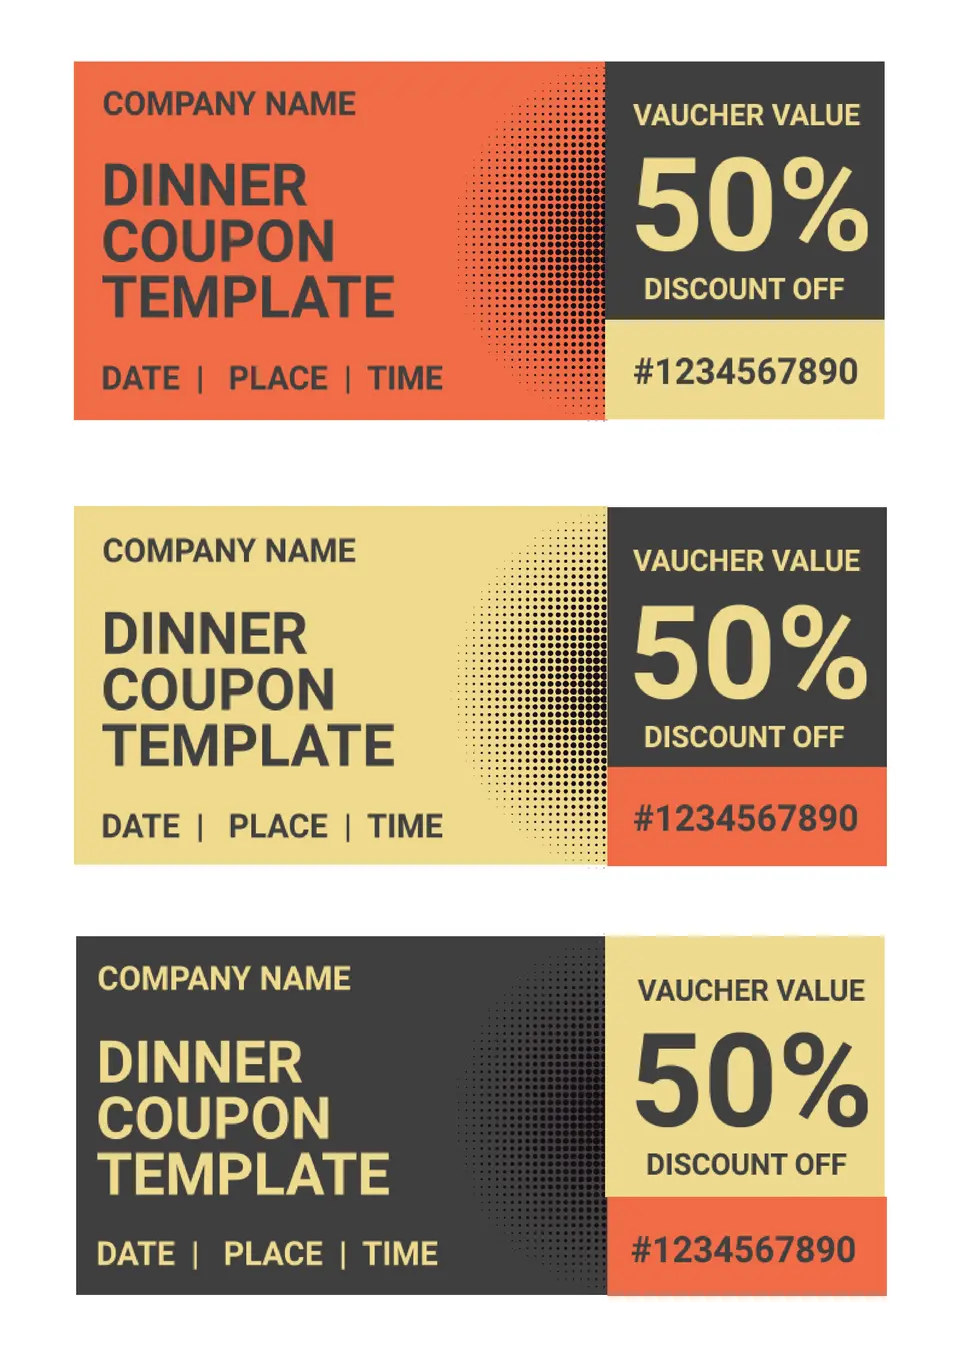 Dinner Coupon Template